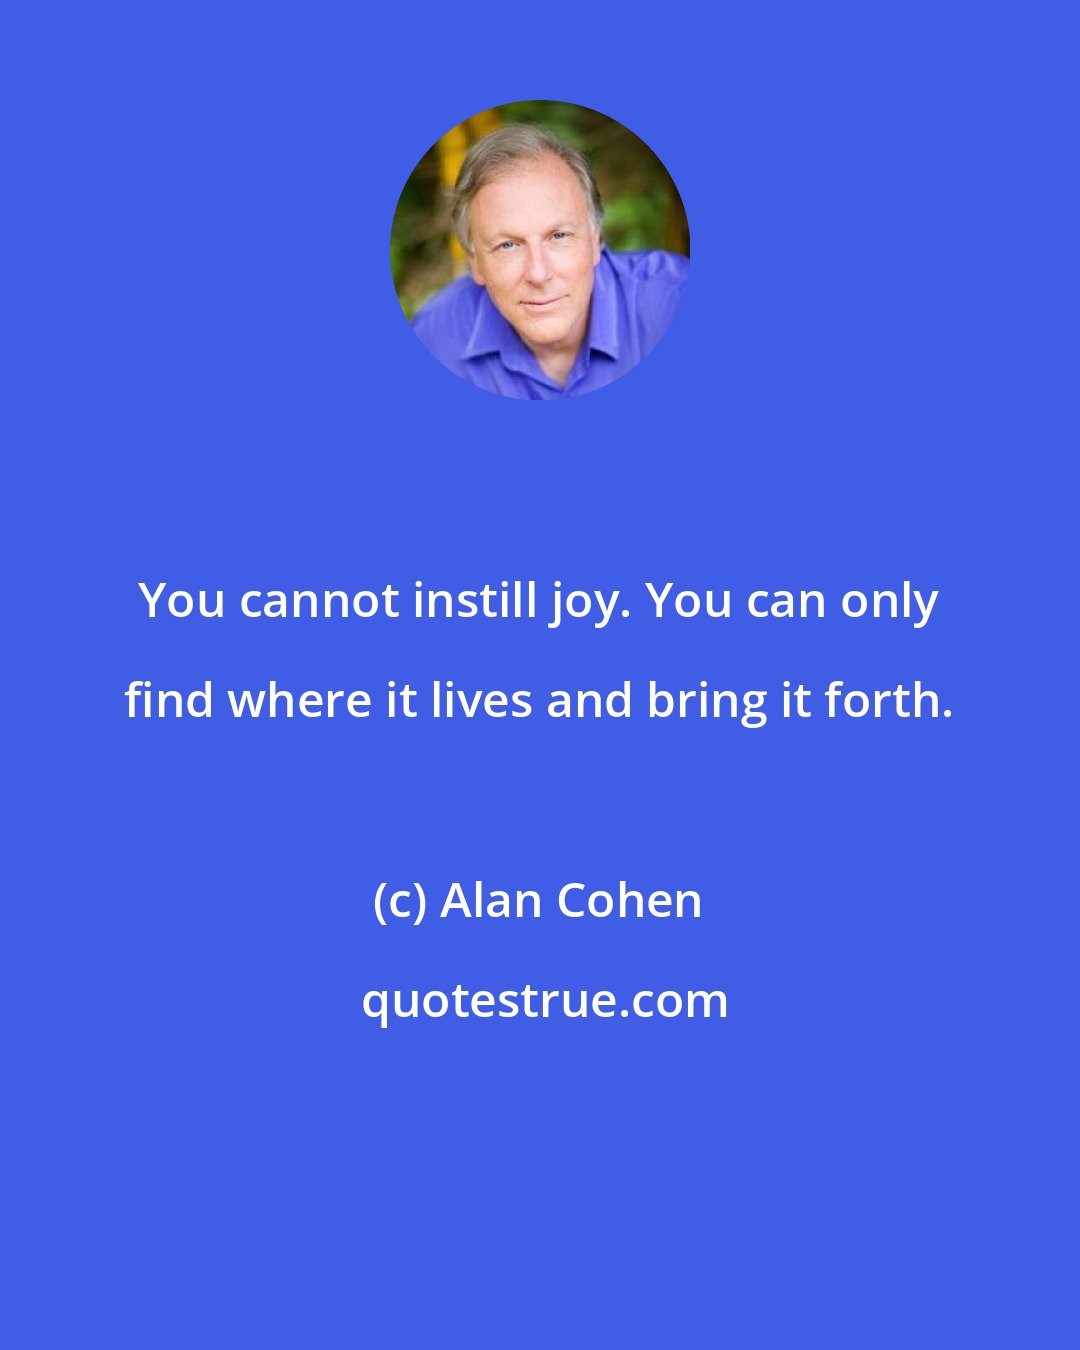 Alan Cohen: You cannot instill joy. You can only find where it lives and bring it forth.